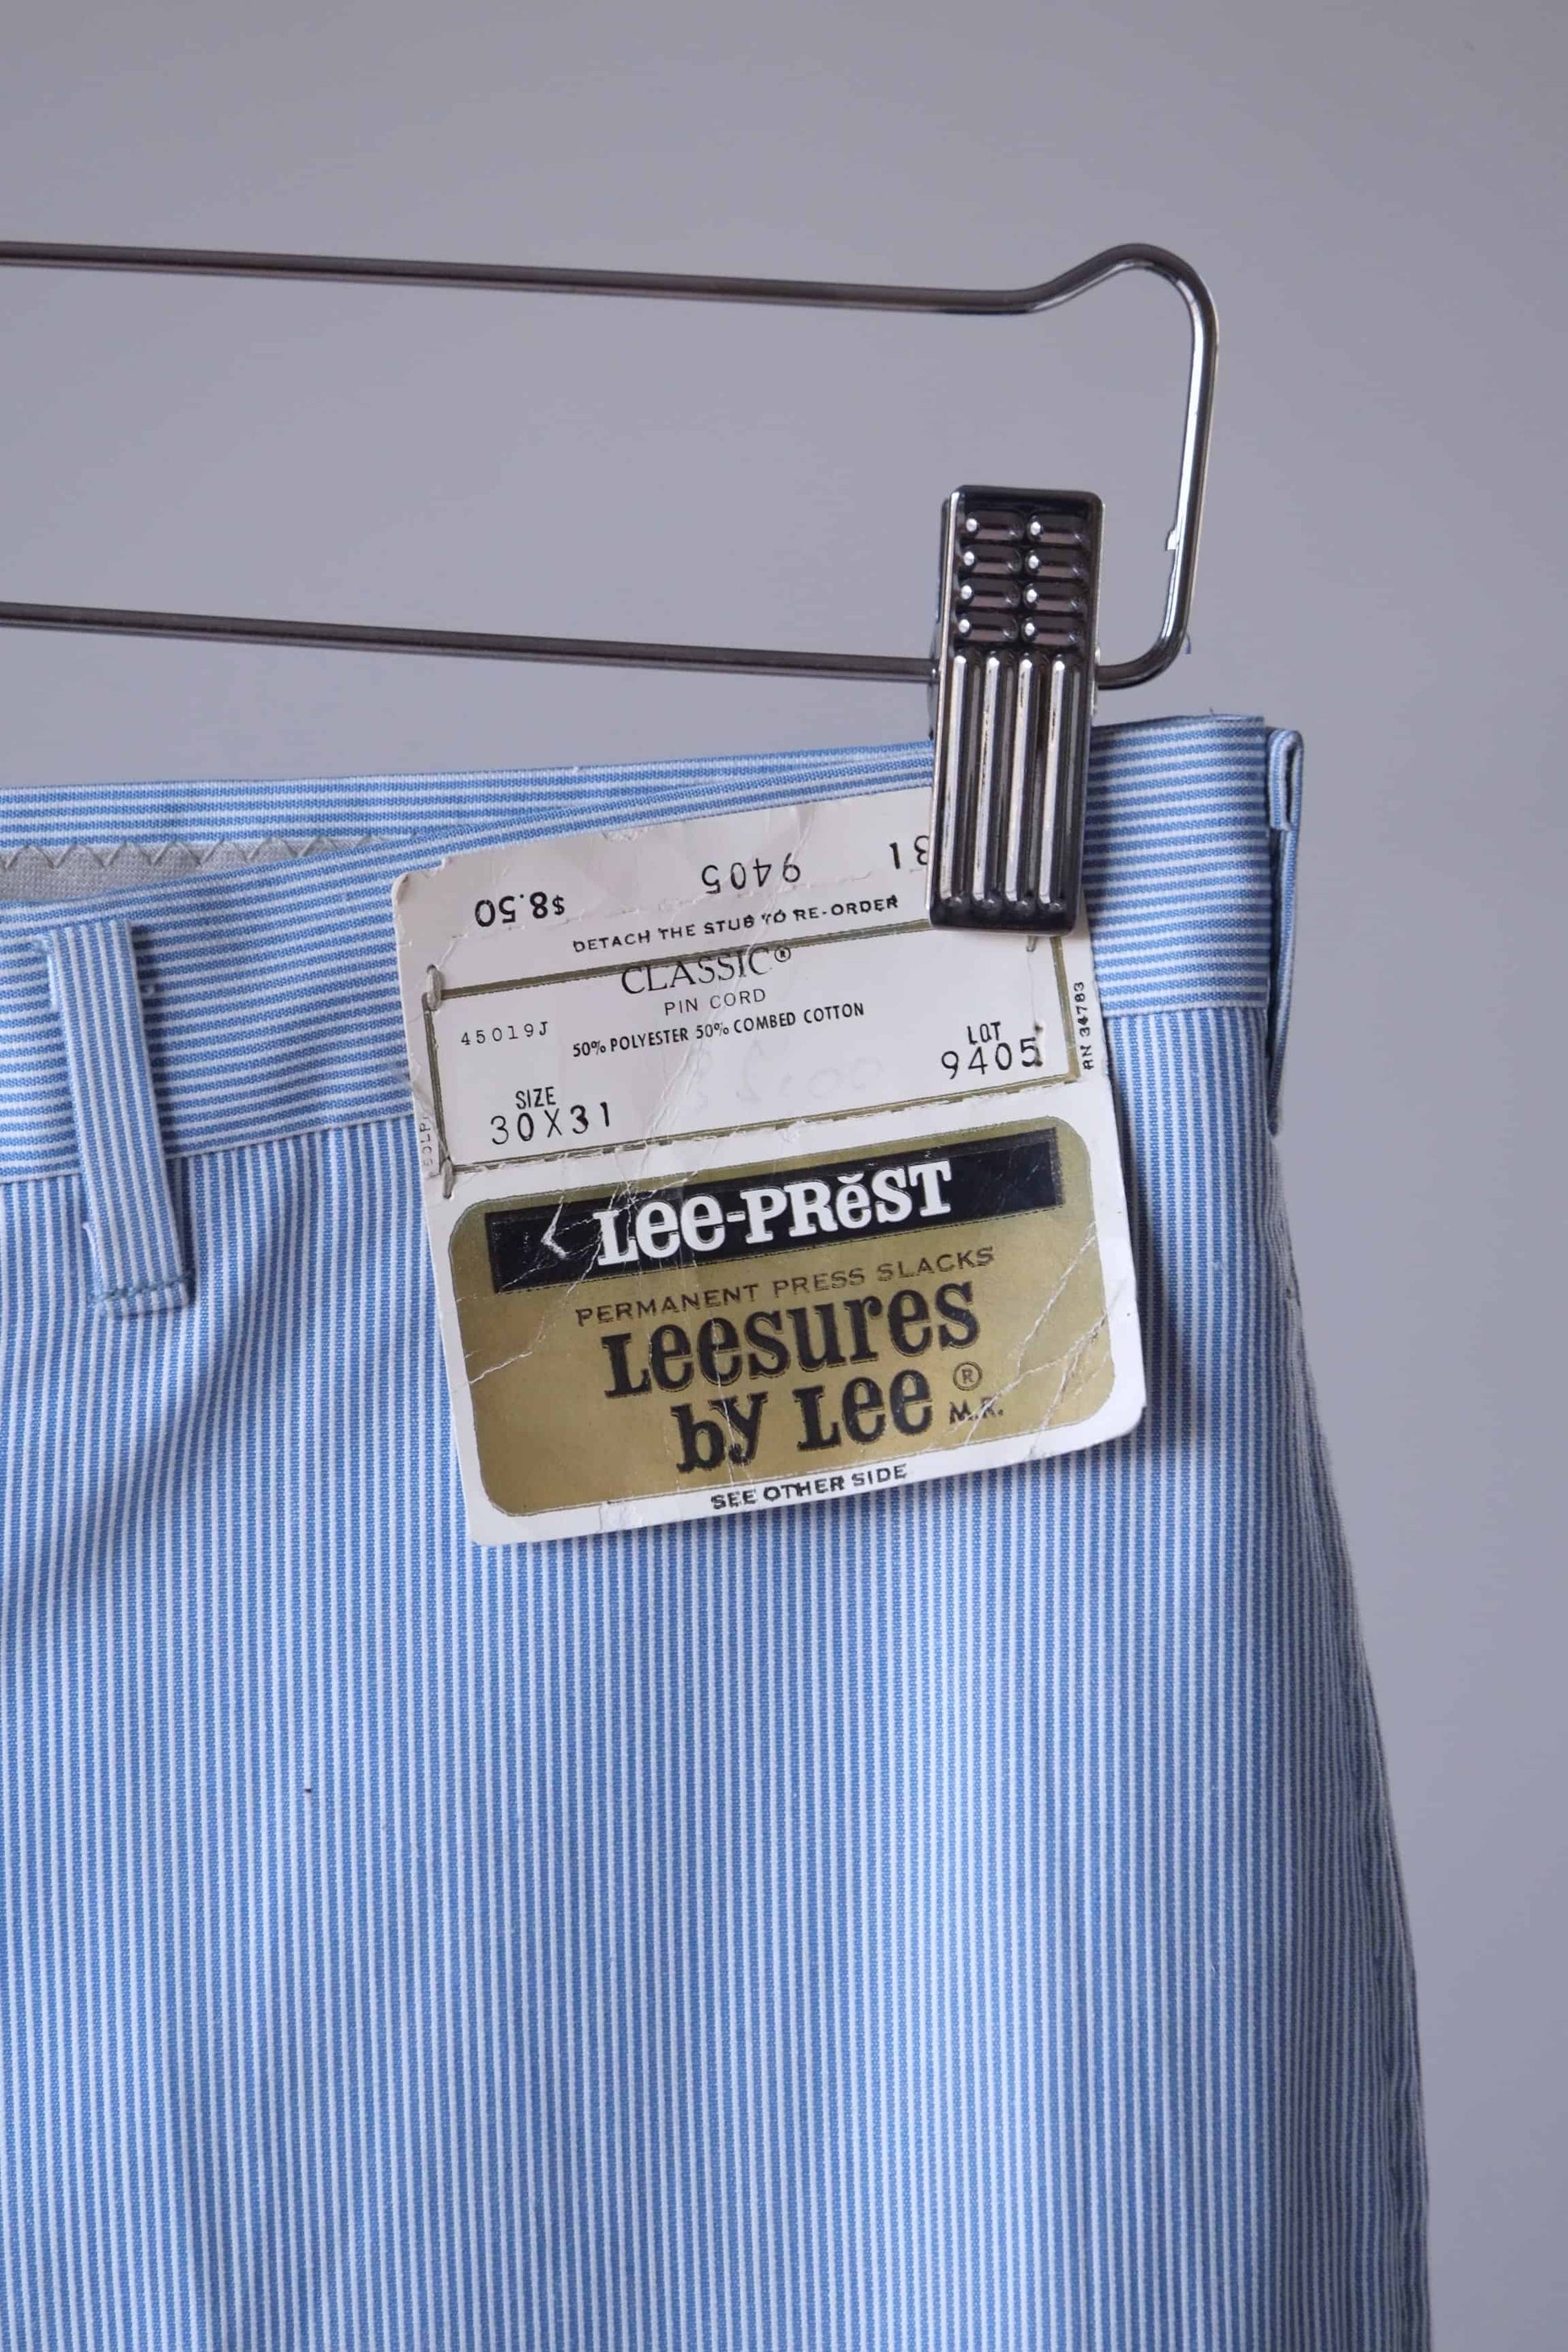 Close view of the label on the waist of a pair of LEE Prest Vintage 60's Classic Pinstripe Cord Slacks